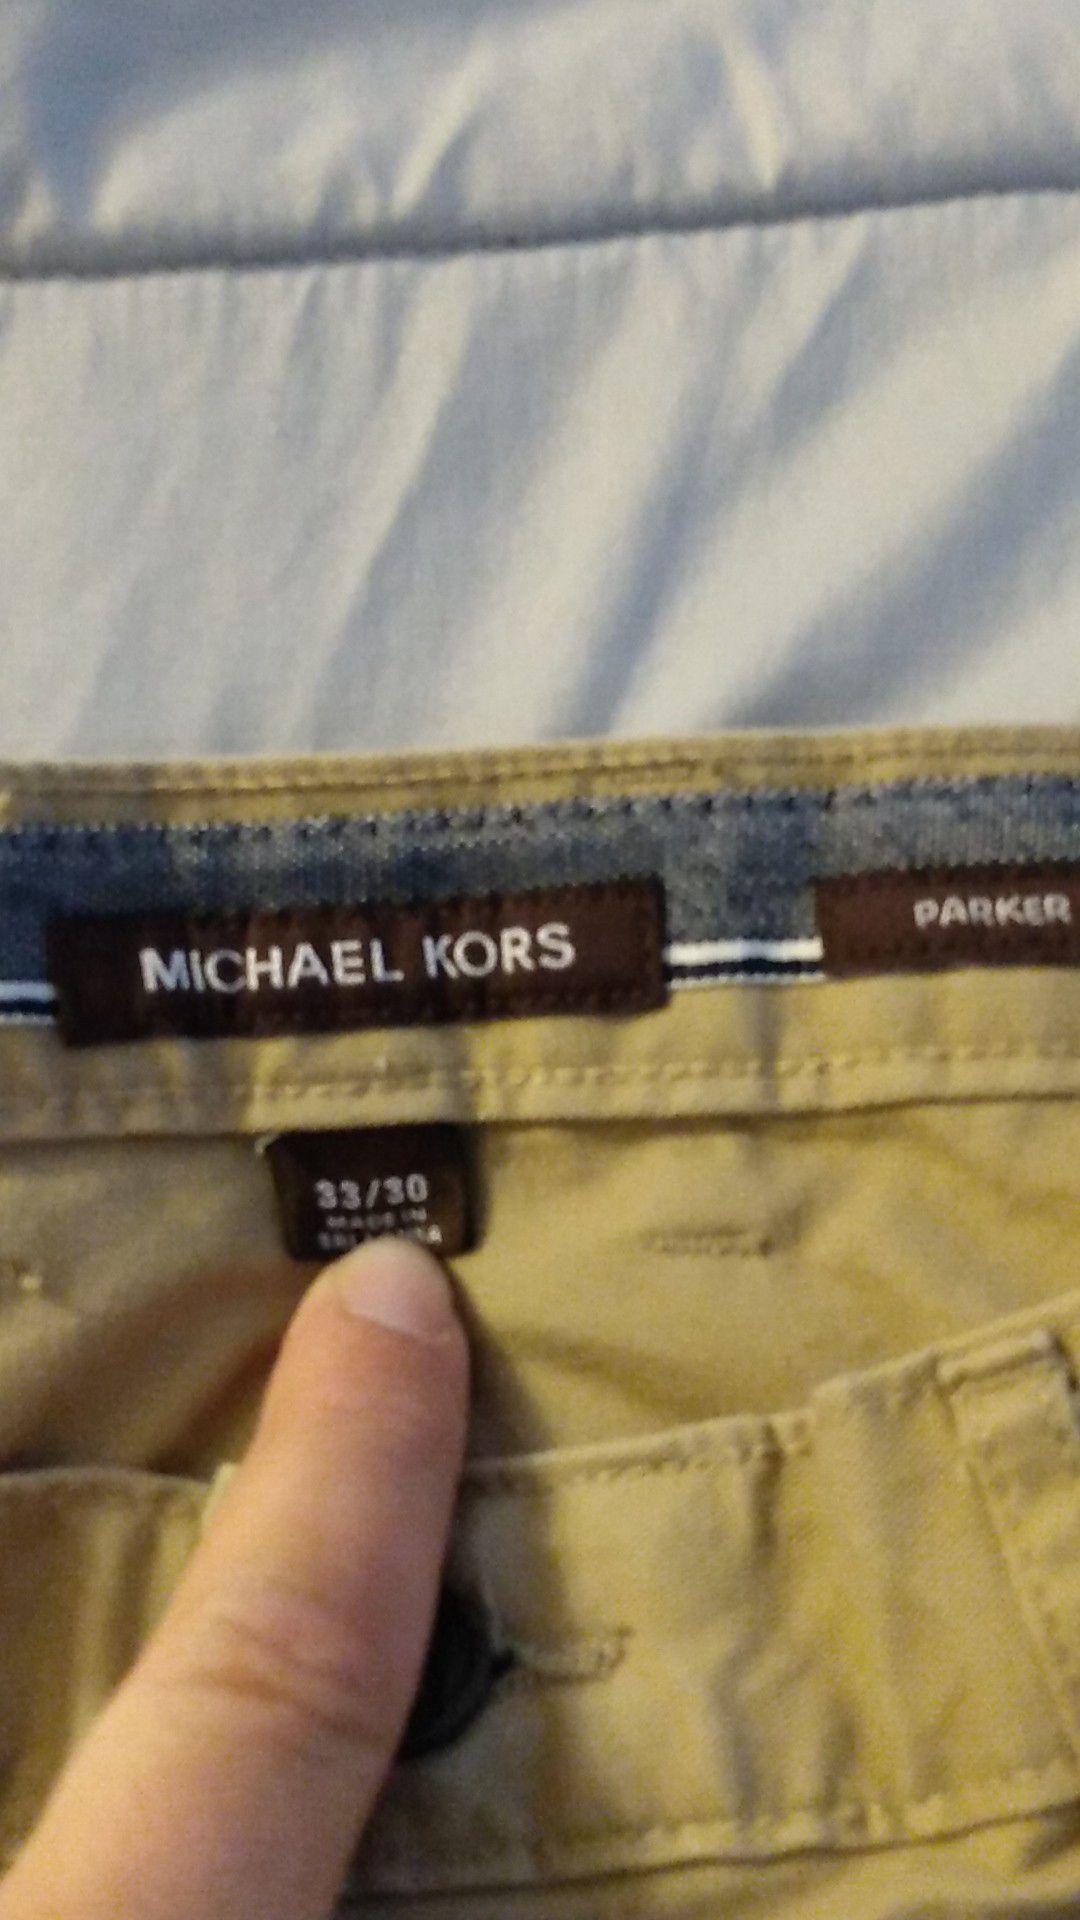 Never warn Michael kors pants tags are of but they haven't Evan bin washed bc they were never used went for $80 they are just to small for me .